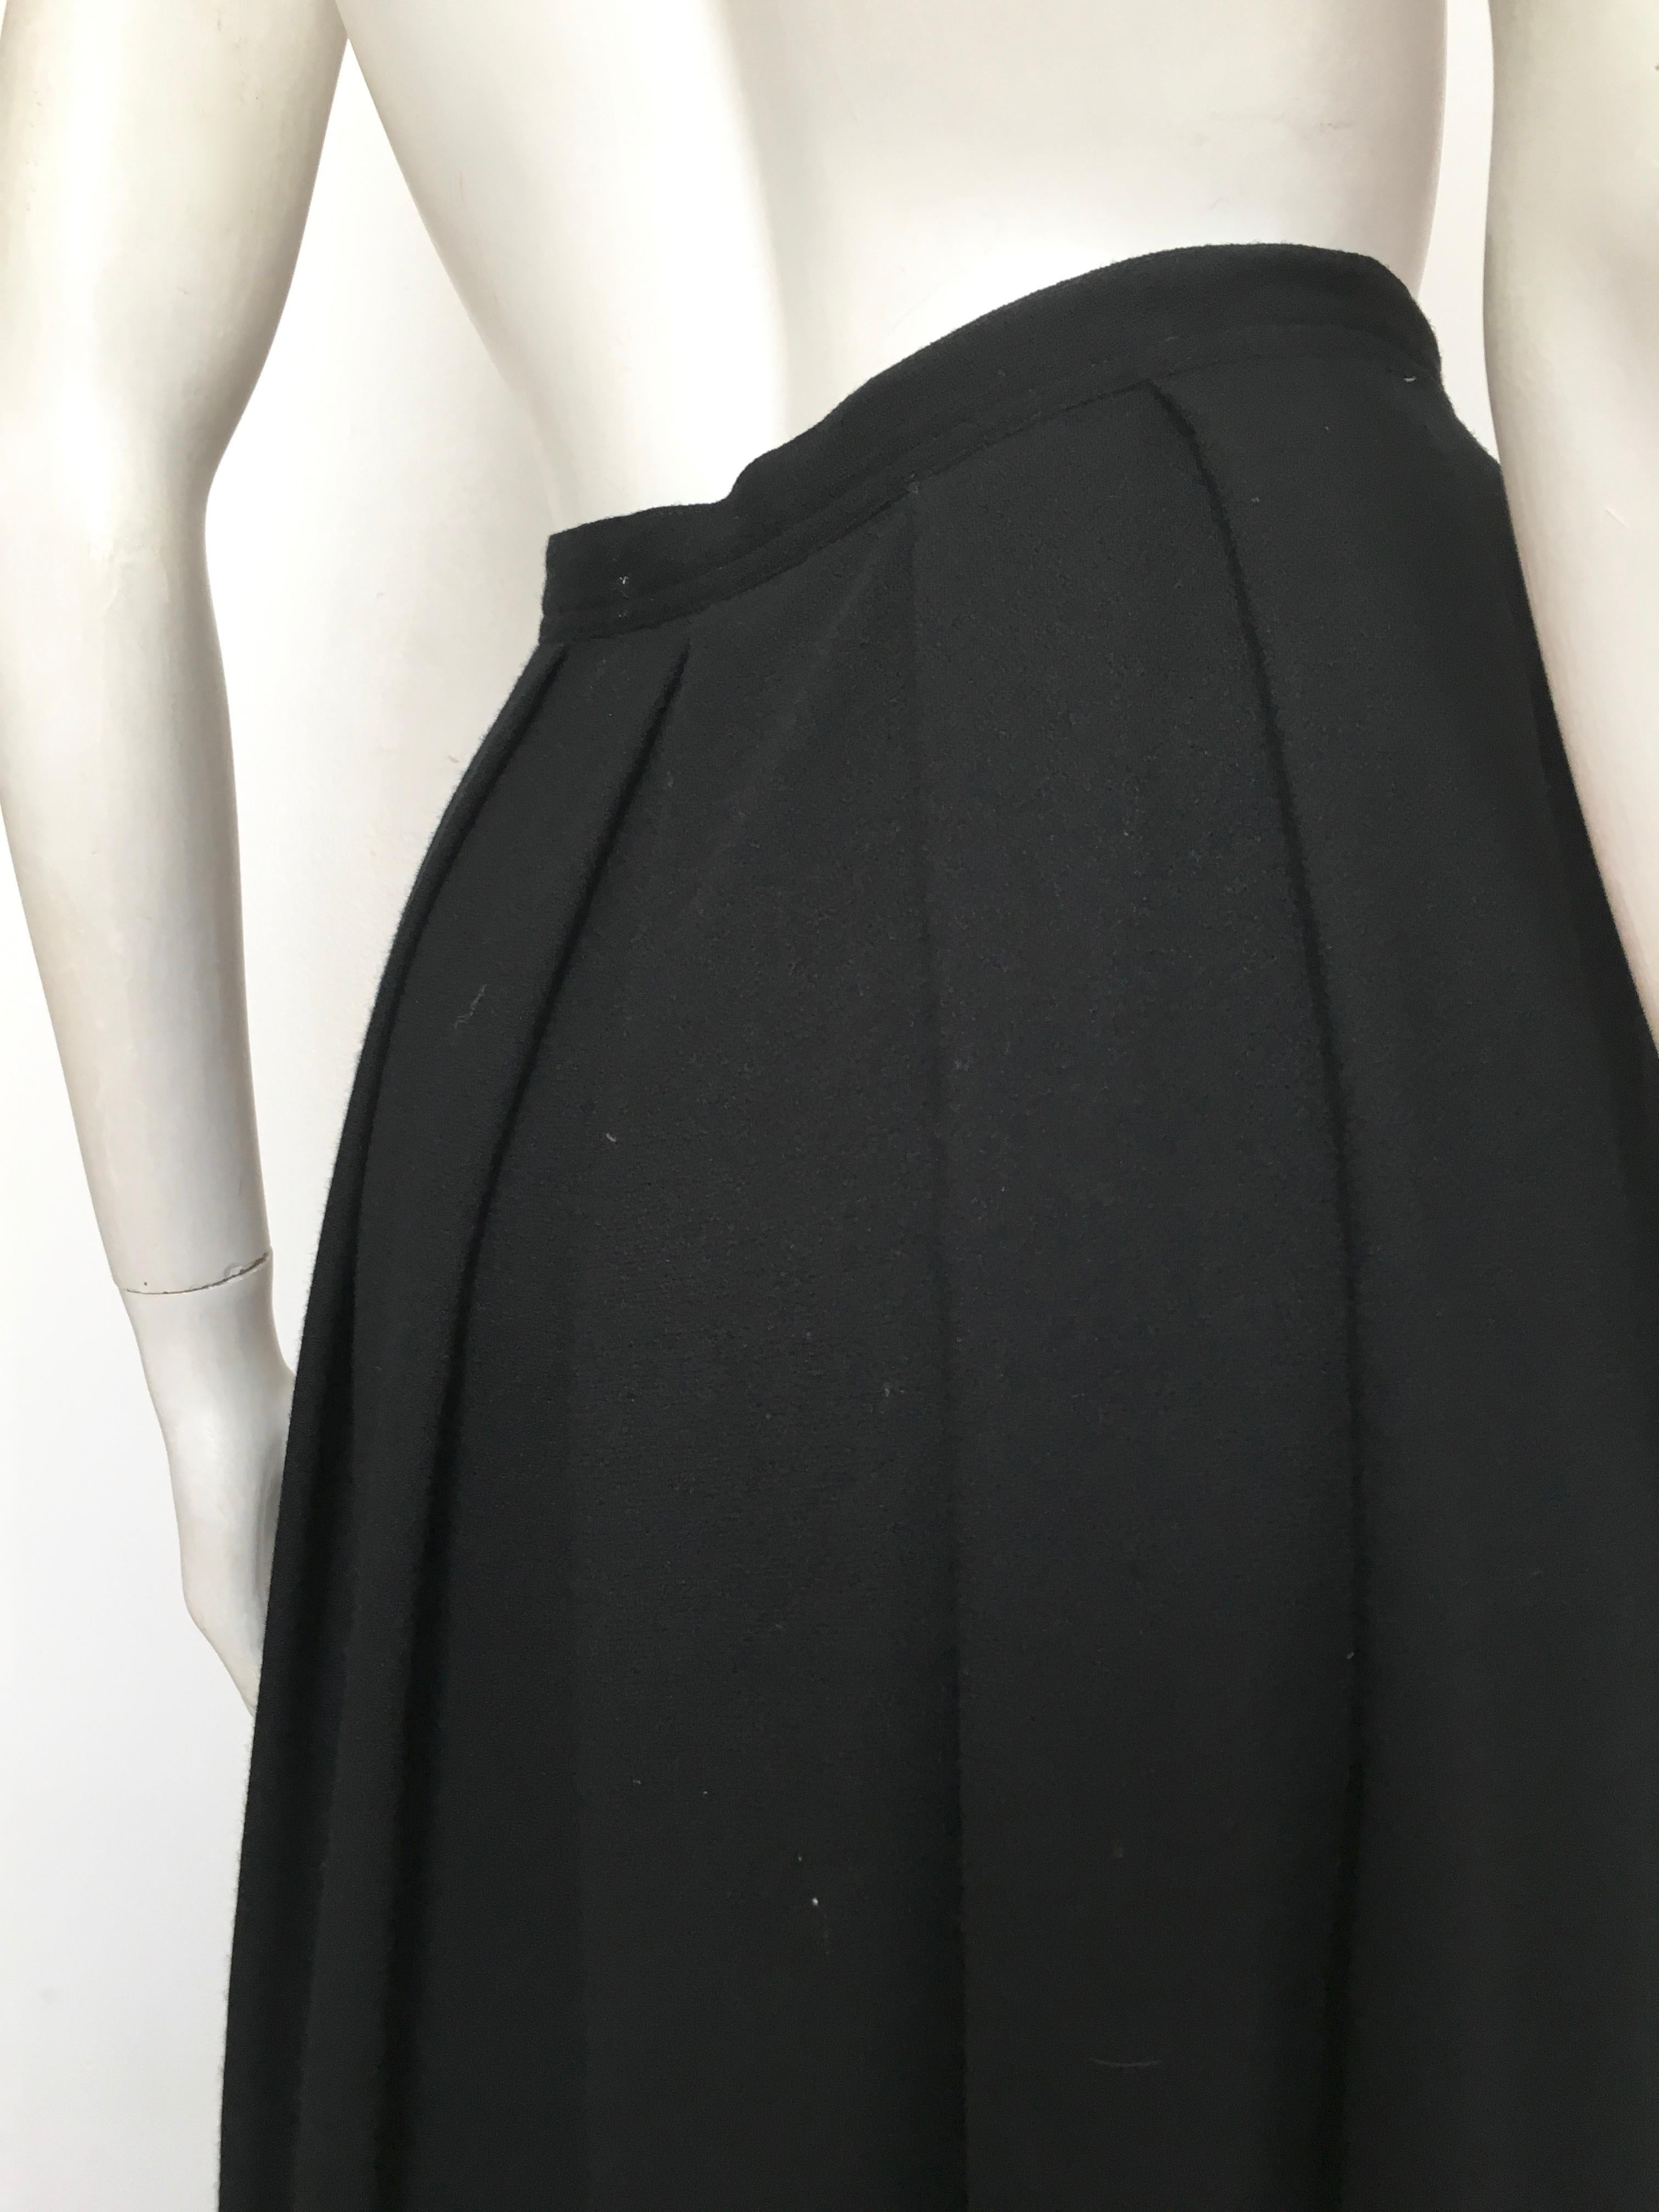 Richard Assatly 1970s Black Wool Pleated Culottes with Pockets Size 6. For Sale 3